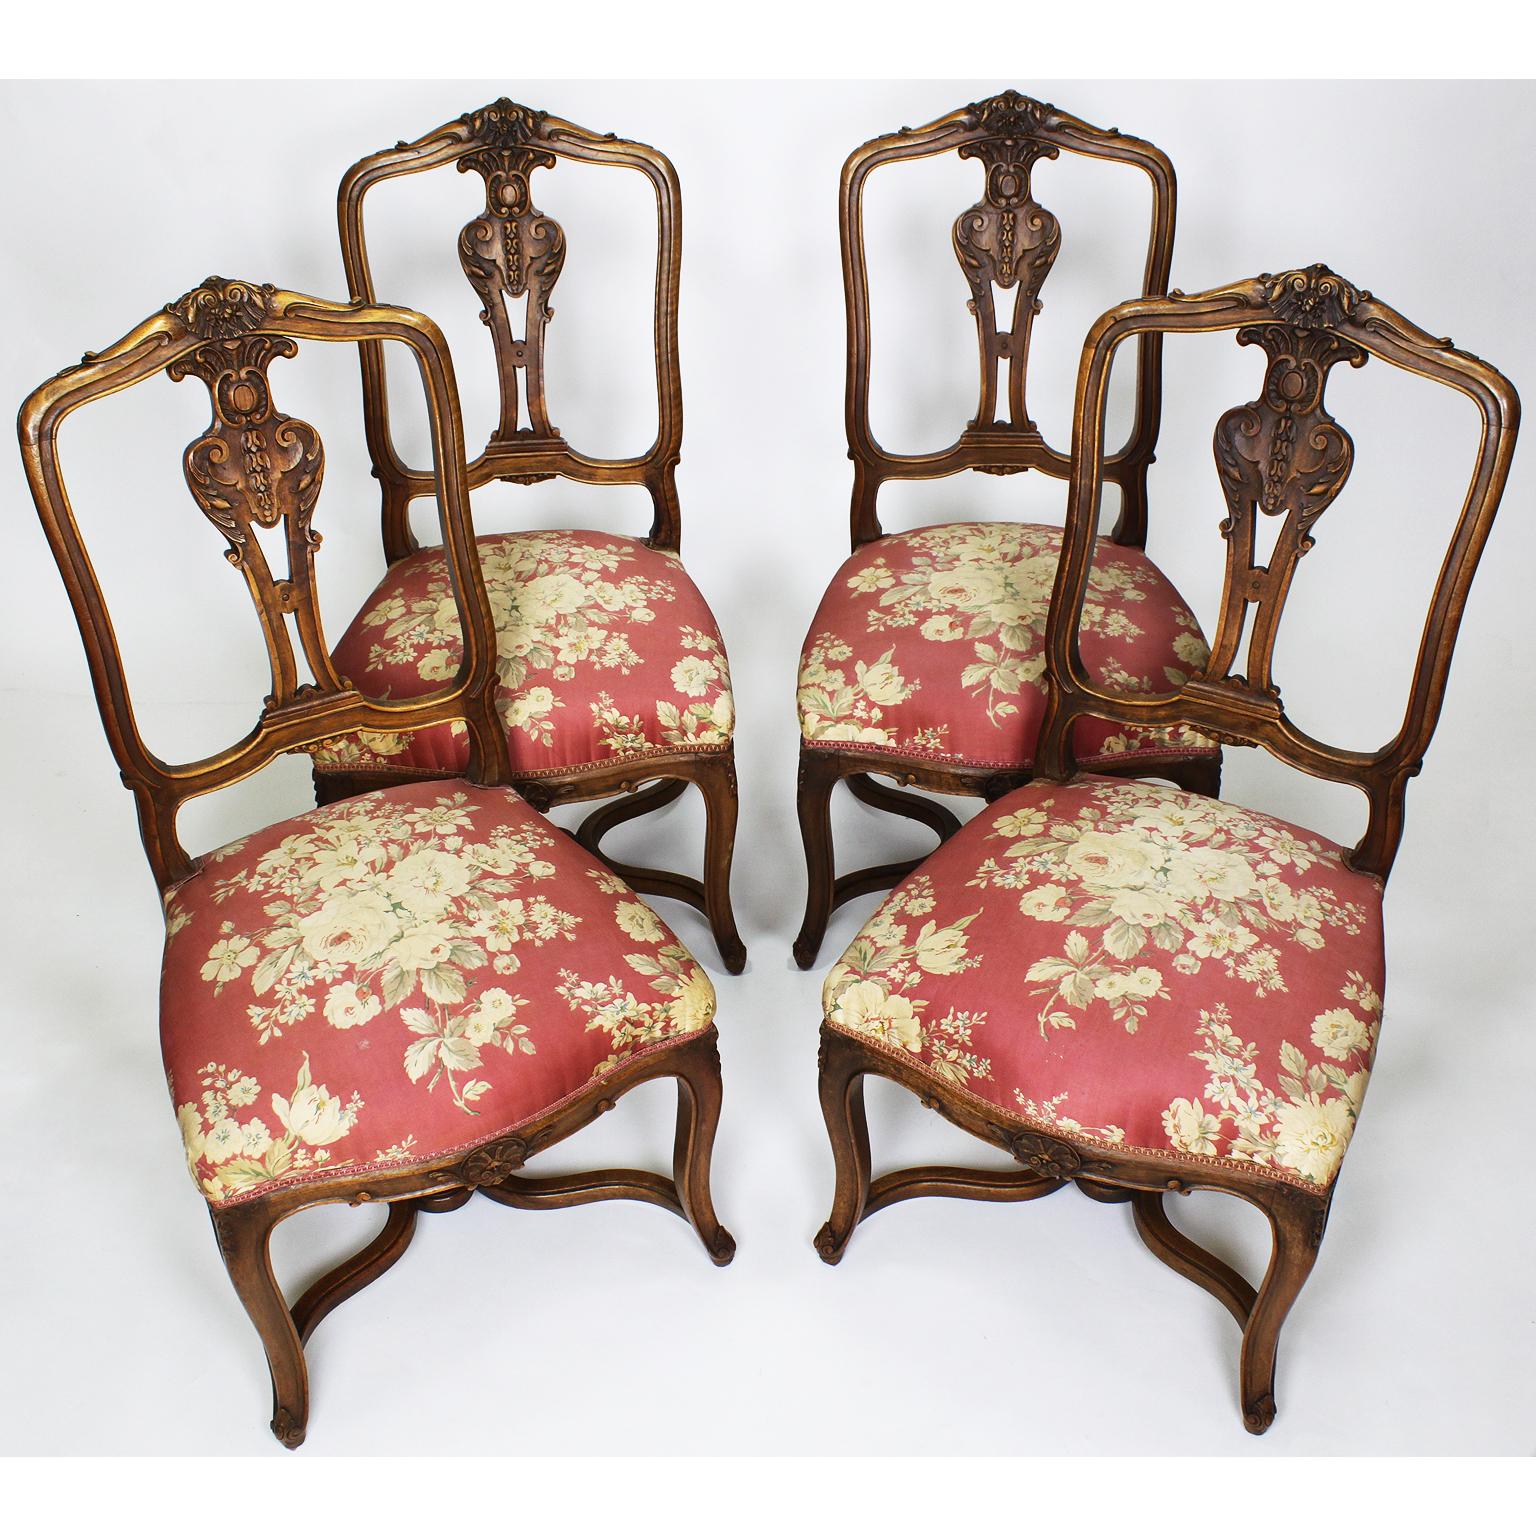 A fine set of Four French, 19th century Louis XV style carved walnut parlor side chairs. The intricately carved backrests with an arched back and raised on four cabriolet legs conjoined with an 